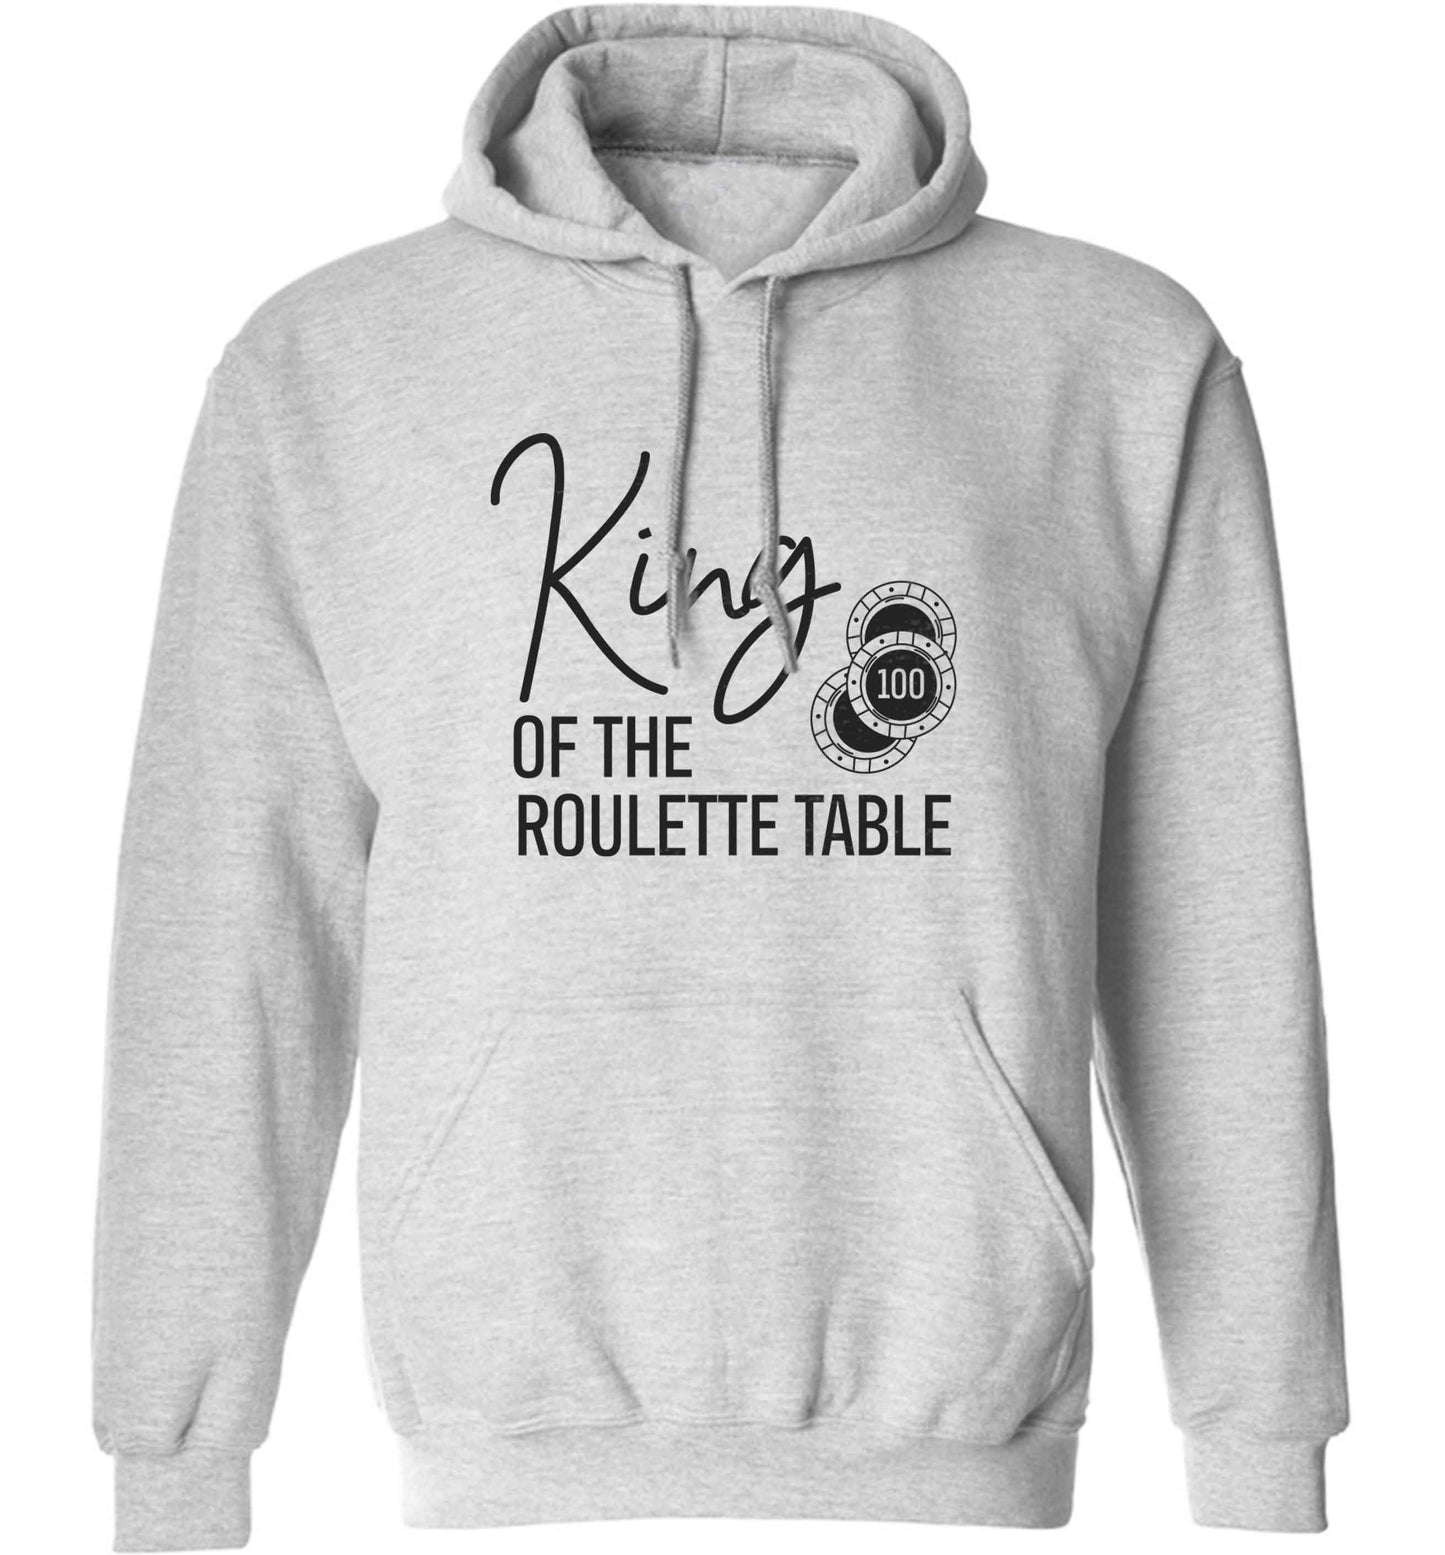 King of the roulette table adults unisex grey hoodie 2XL